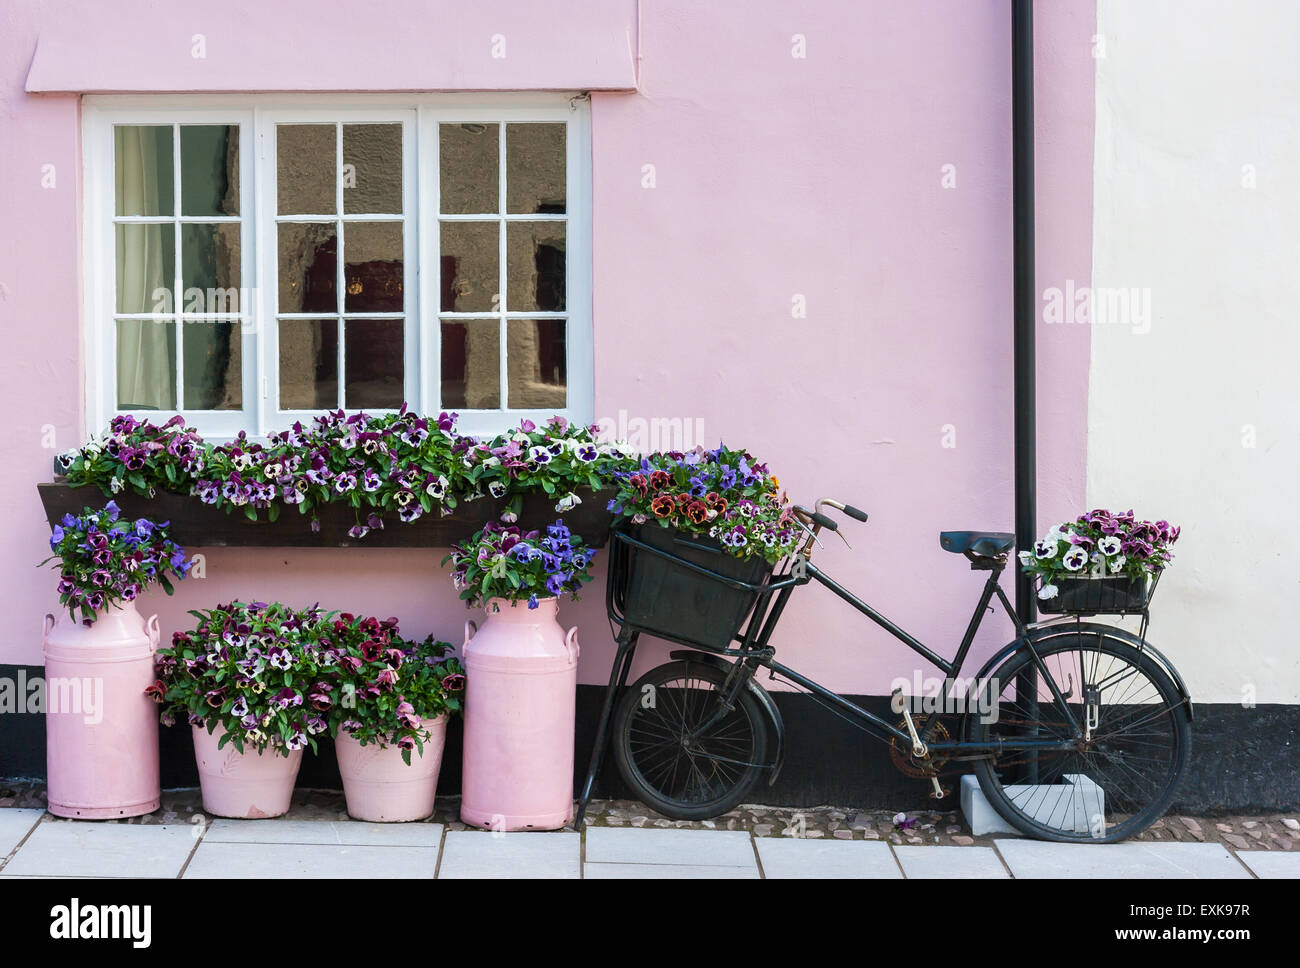 Colorful flower arrangement  outside  pink cottage with milk churns, buckets, and  Victorian bicycle. Stock Photo